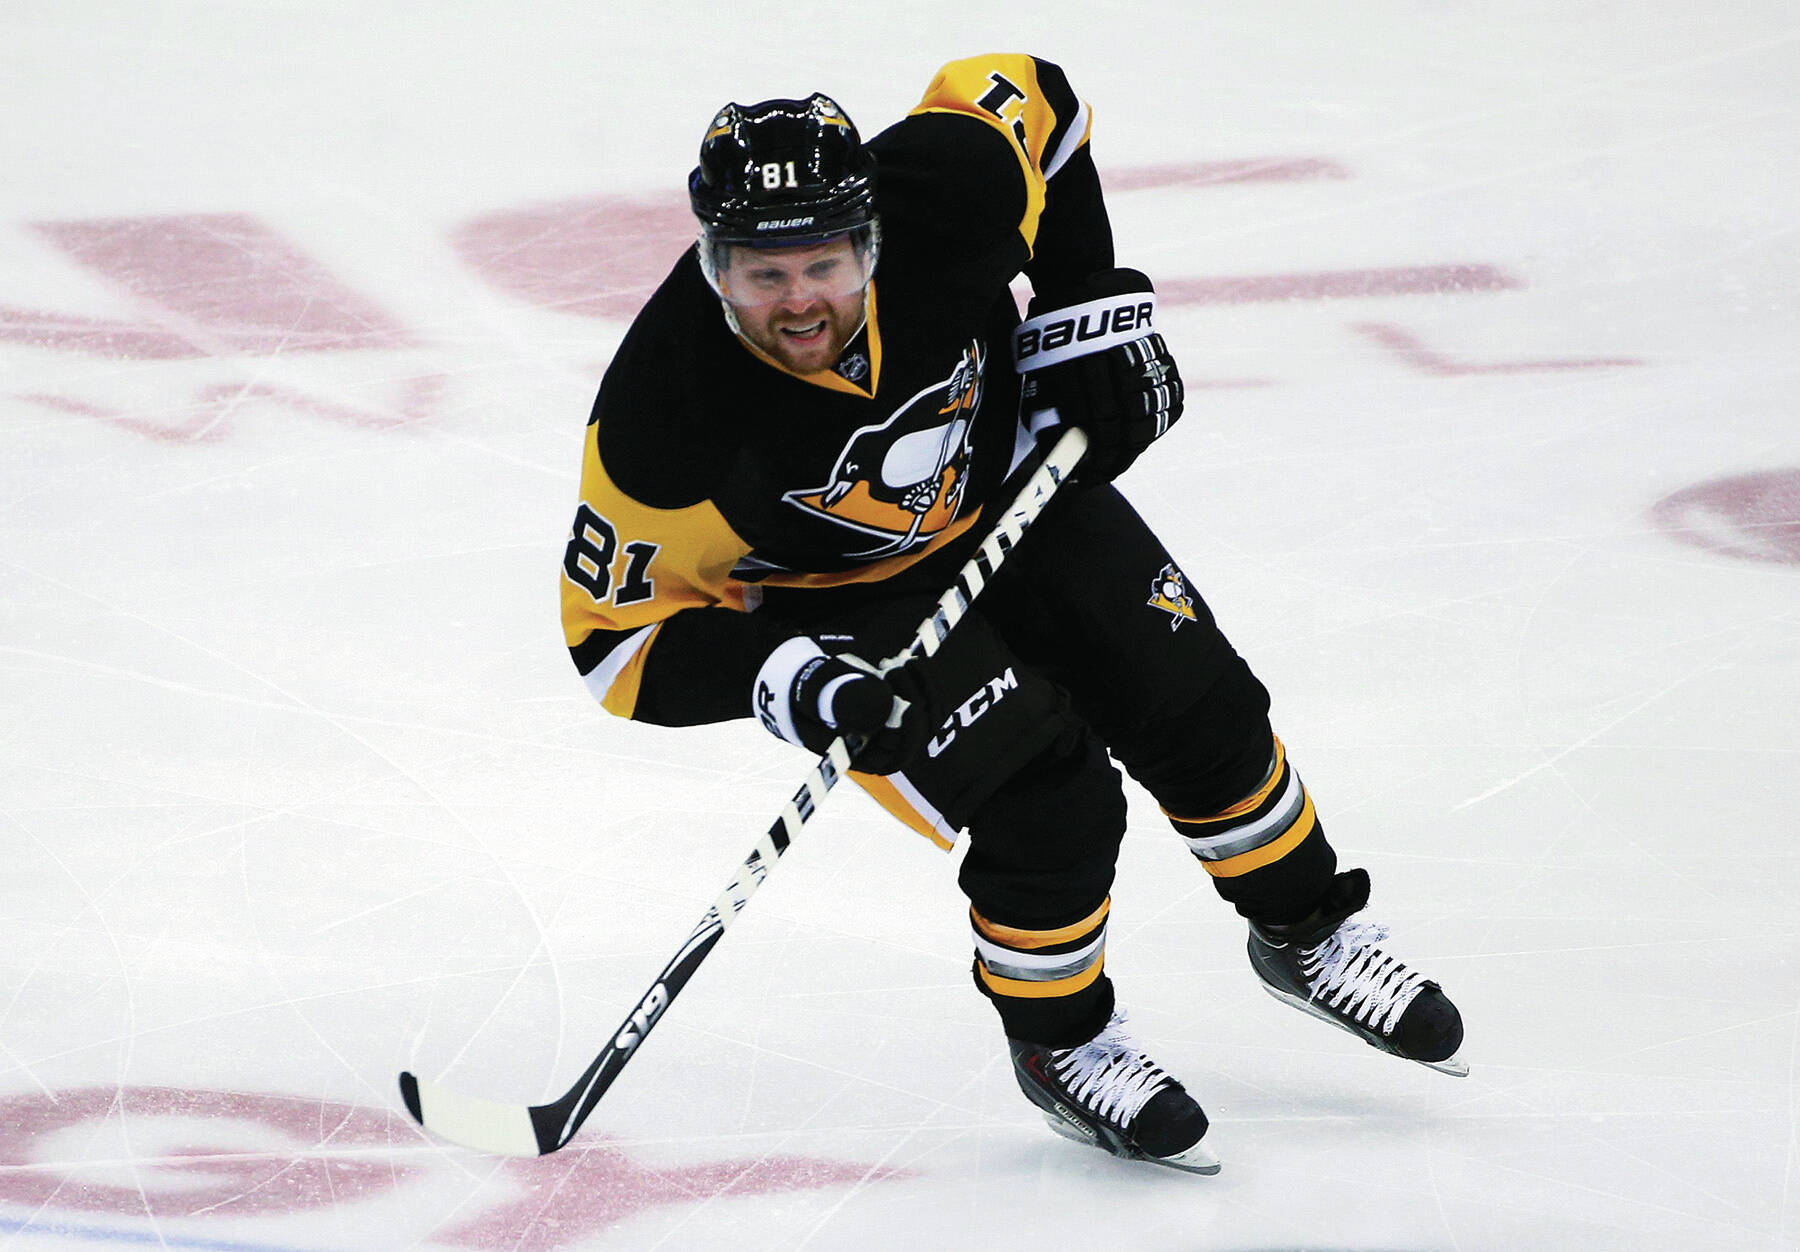 FILE - In this Jan. 2, 2016, file photo, Pittsburgh Penguins’ Phil Kessel plays during the team’s NHL hockey game against the New York Islanders in Pittsburgh. (AP Photo/Gene J. Puskar, File)
FILE - In this Jan. 2, 2016, file photo, Pittsburgh Penguins’ Phil Kessel plays during the team’s NHL hockey game against the New York Islanders in Pittsburgh. USA Hockey left Kessel off the list of the first 16 players selected to the U.S. team for the World Cup of Hockey, Wednesday, March 2.. (AP Photo/Gene J. Puskar, File)